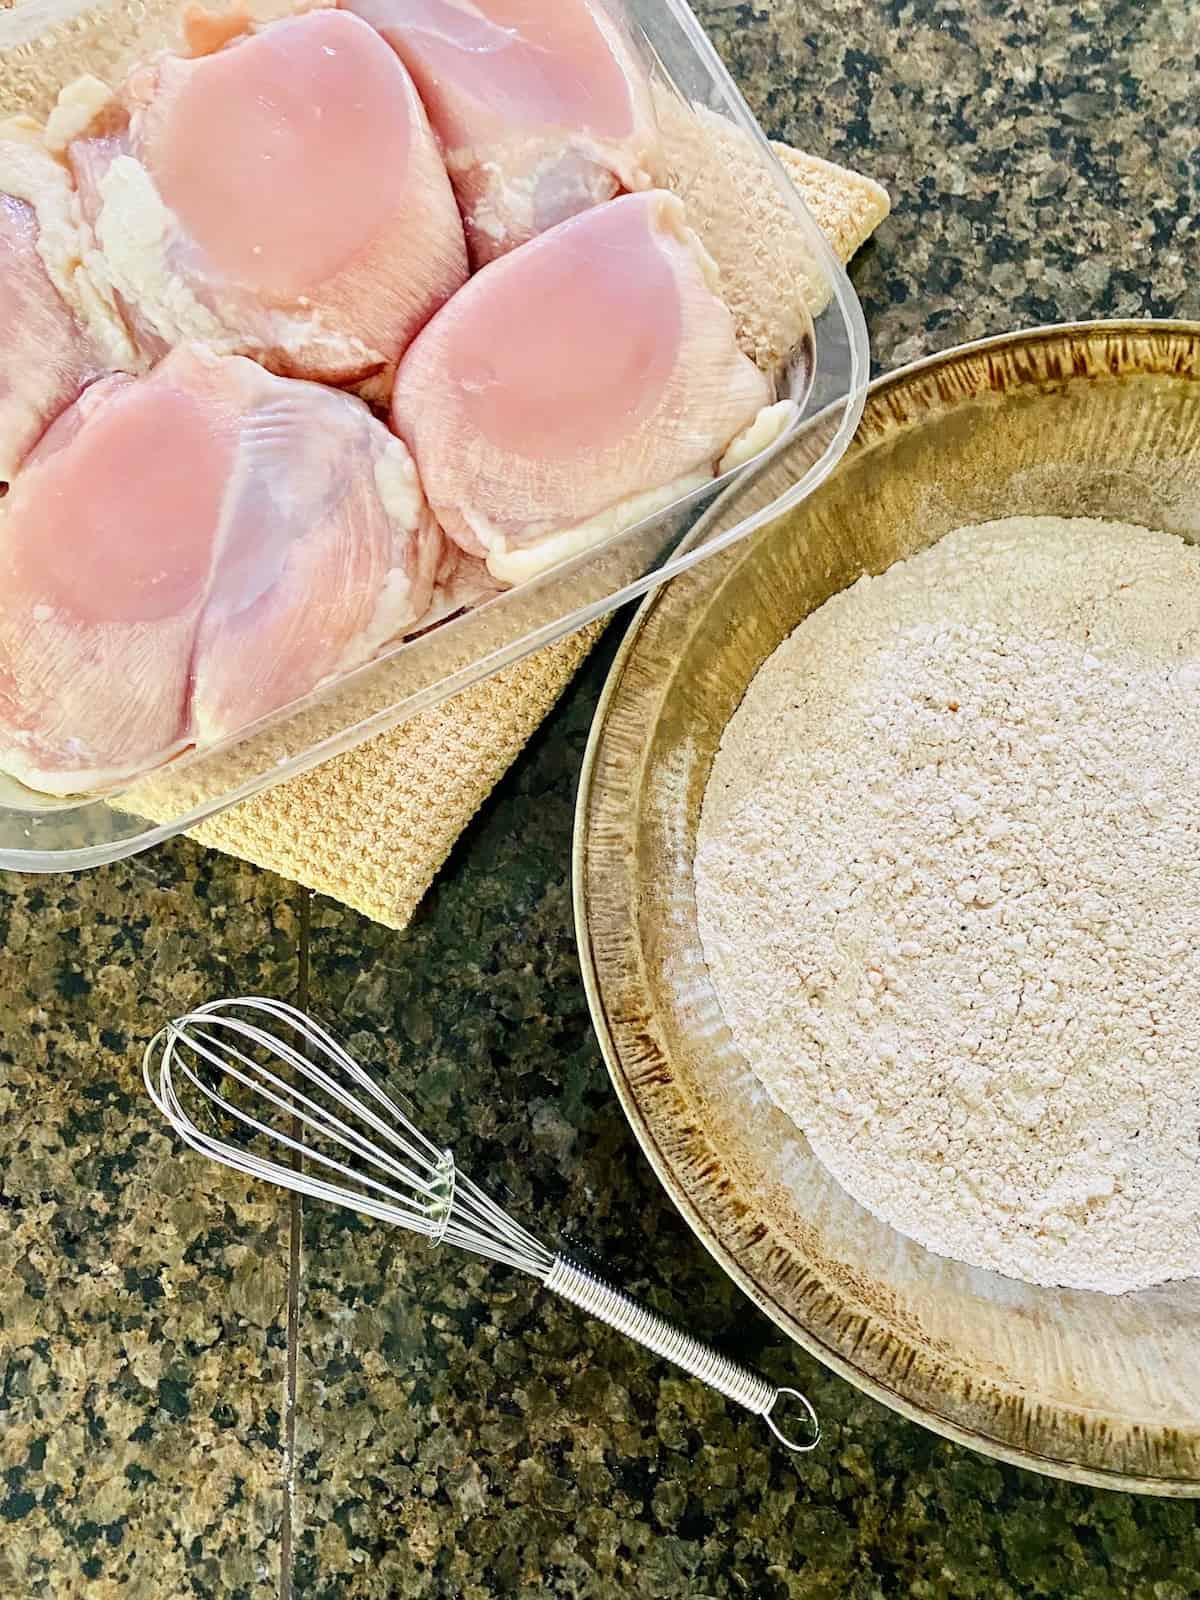 Thighs next to seasoned flour in a dish.